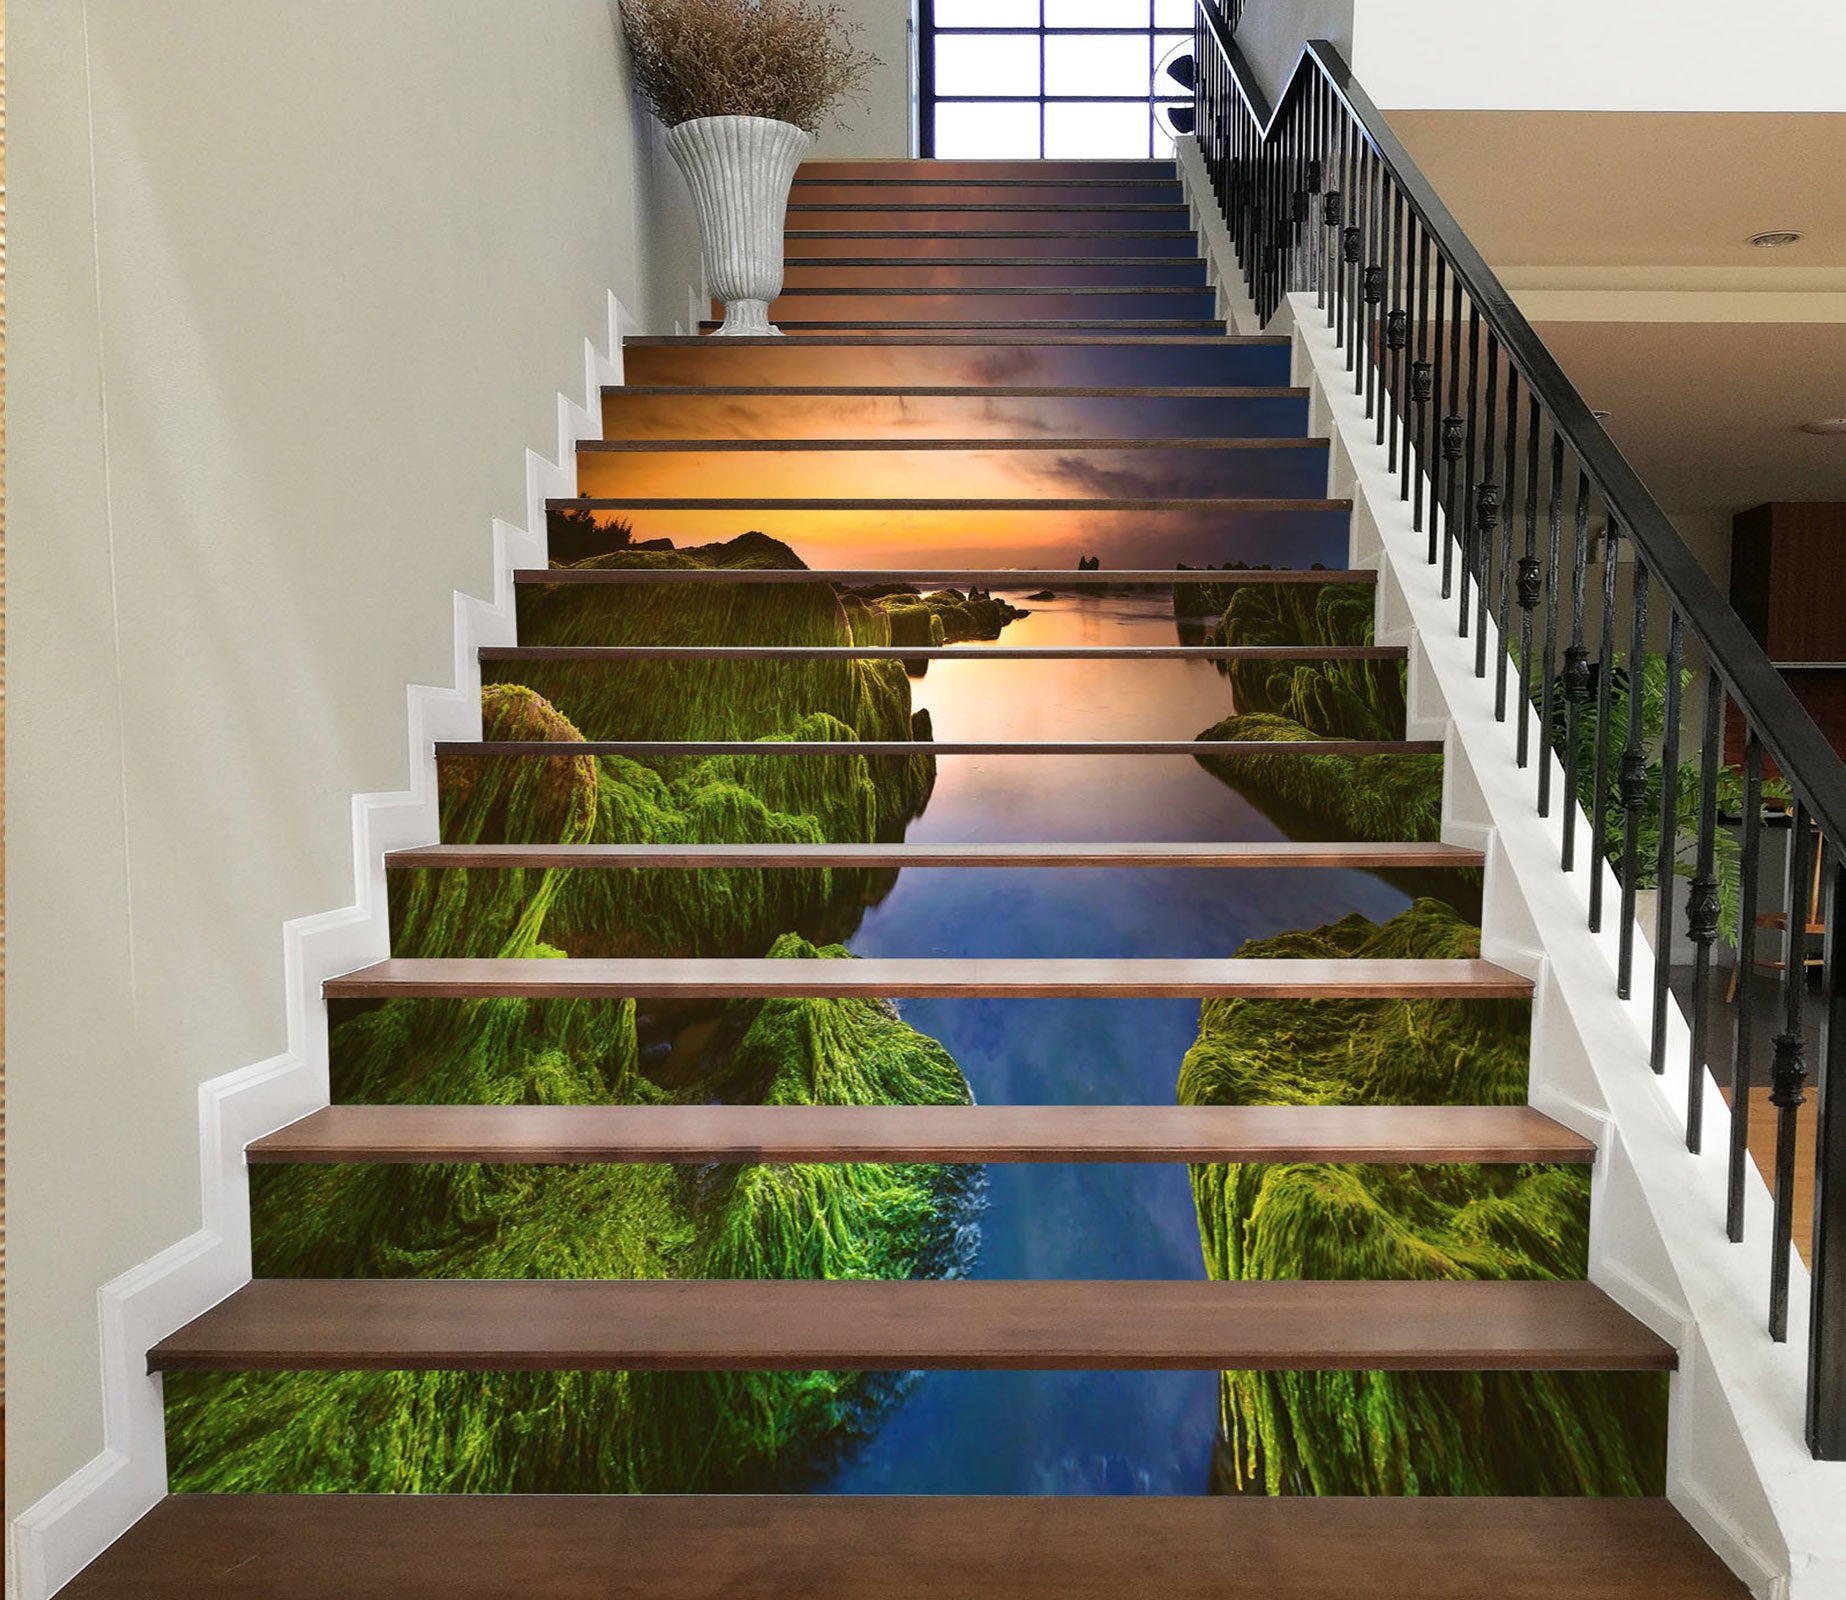 3D Calm And Picturesque Lake 637 Stair Risers